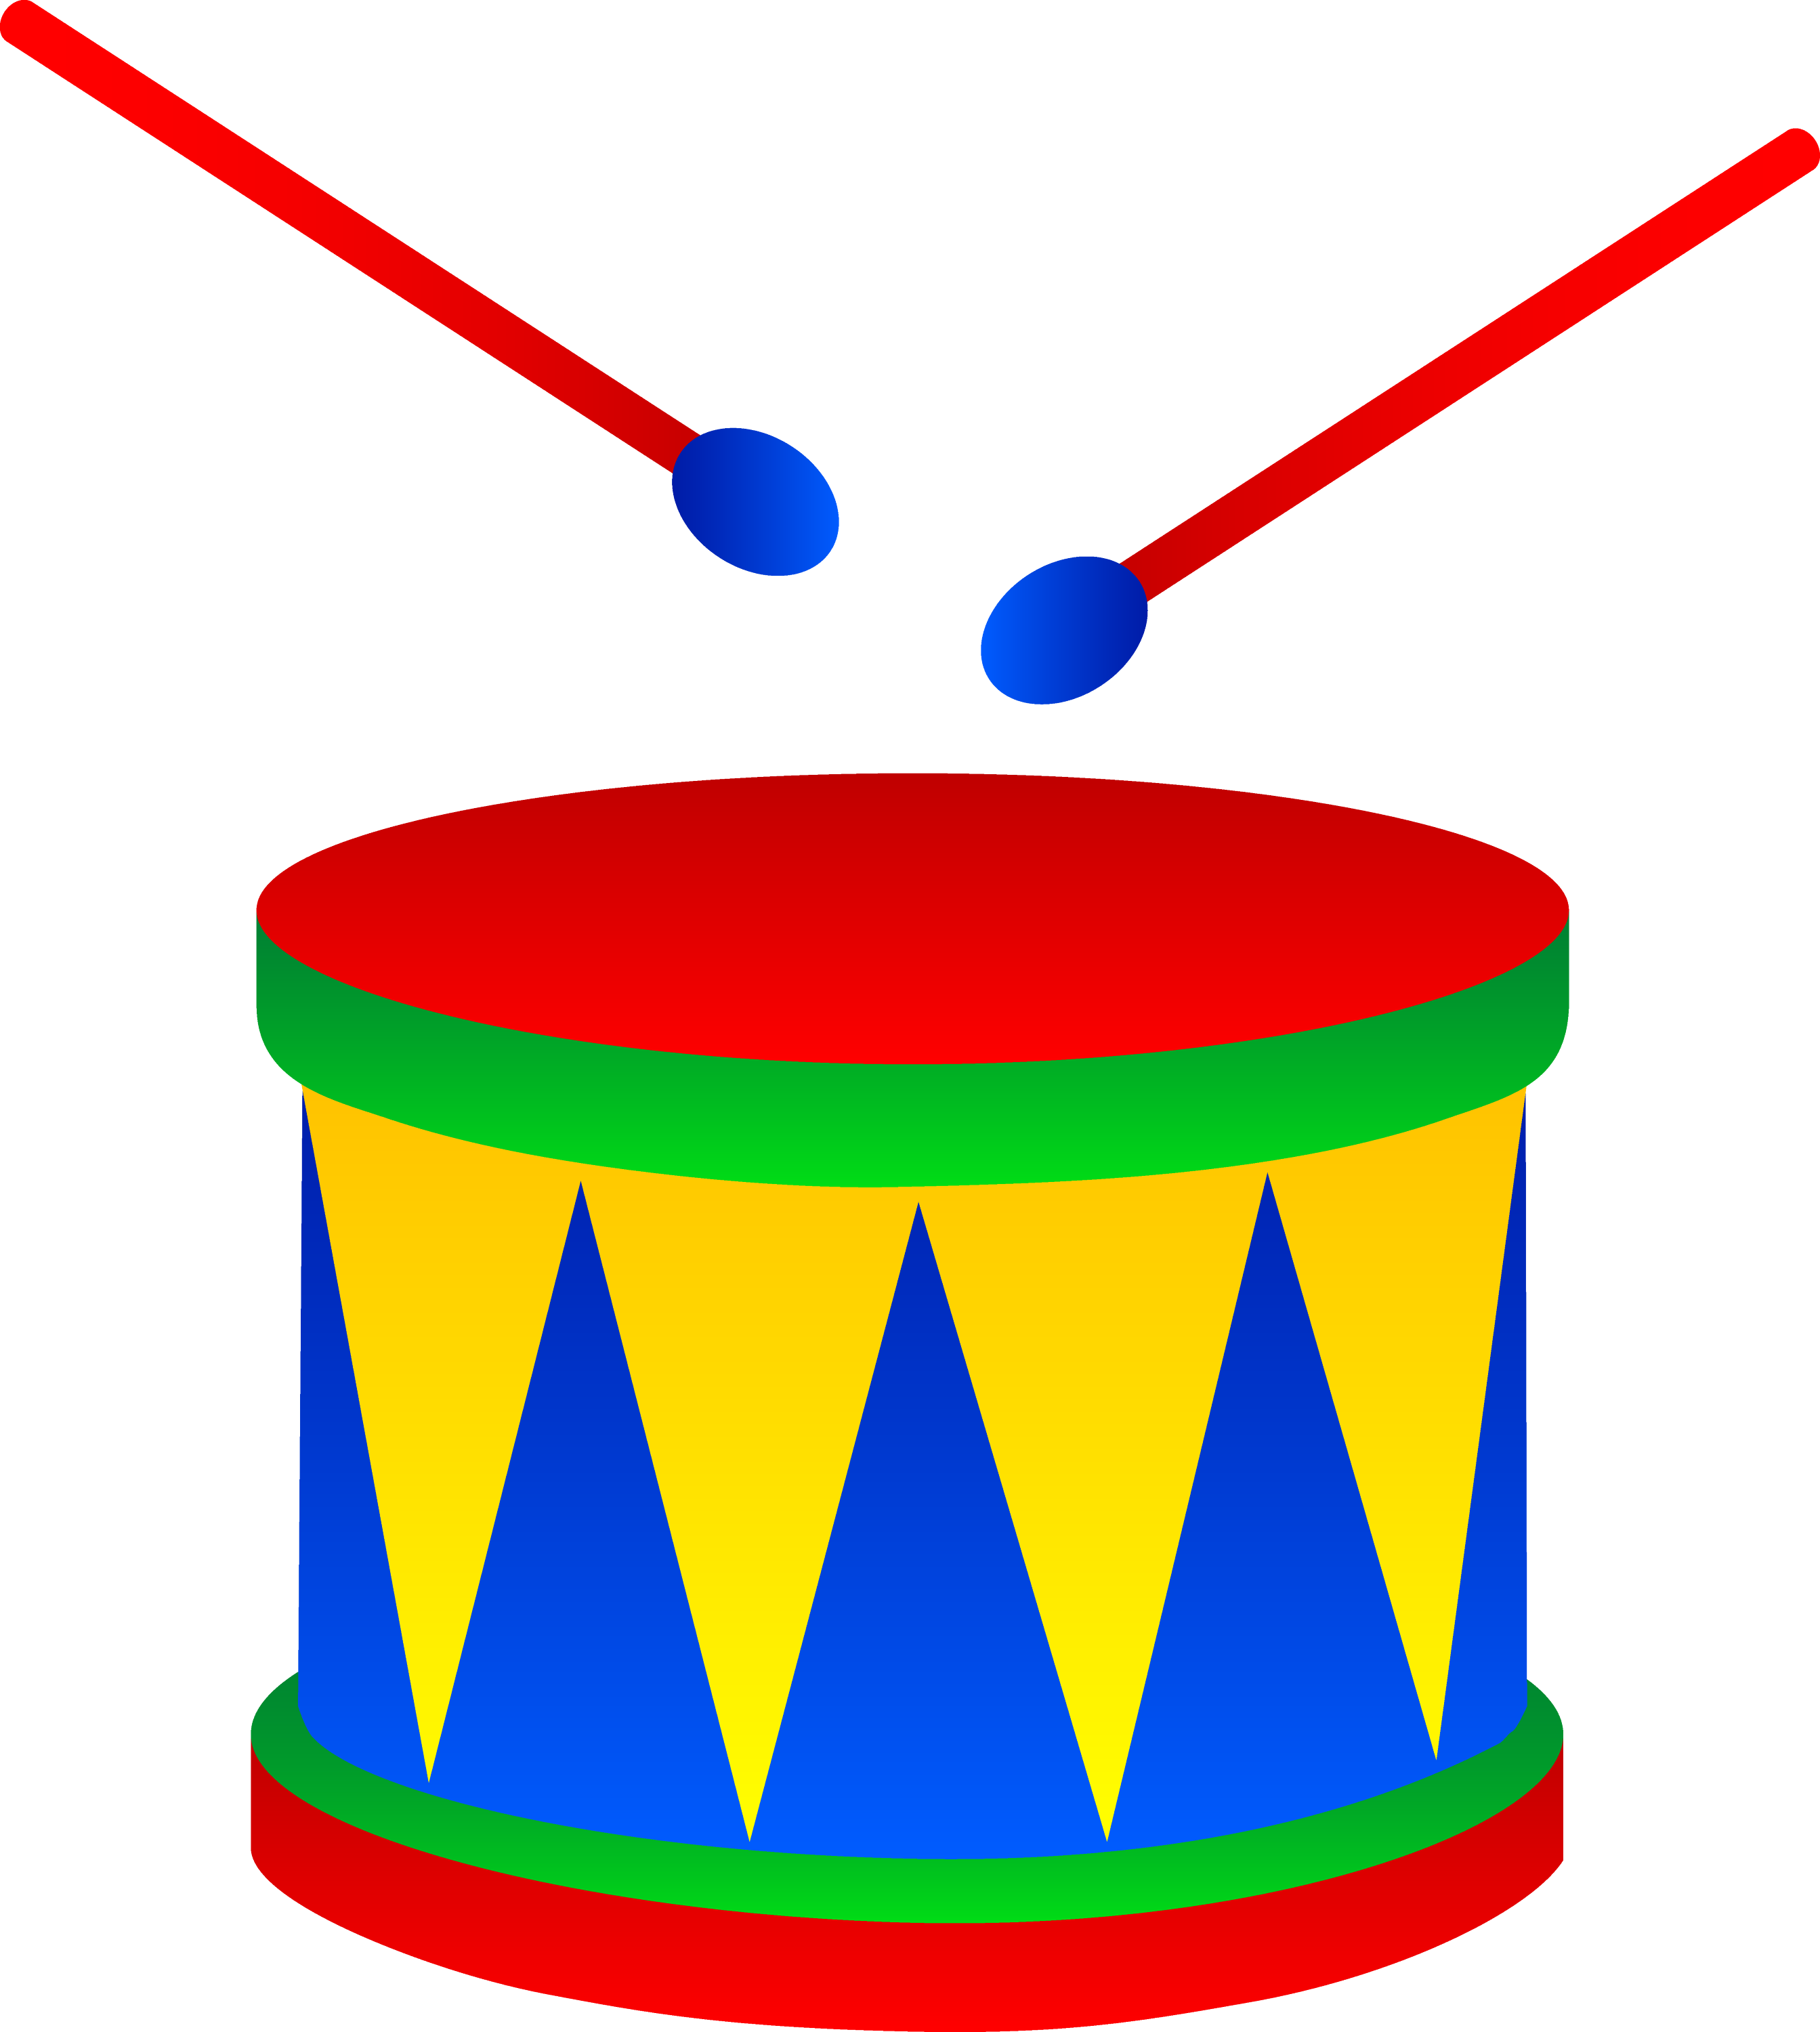 Marching Drum With Drumsticks Free Clip Art